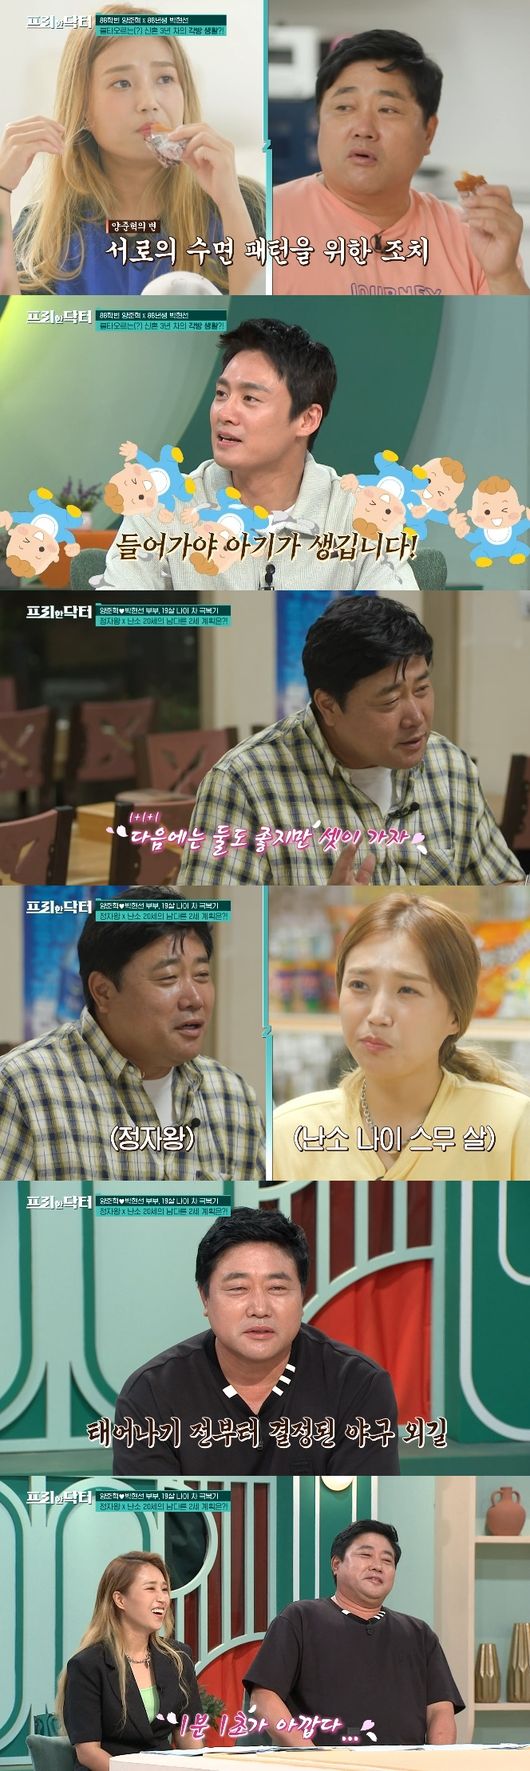 Baseball players Yang Joon-hyuk and Park Hyun-sun revealed their plans for the second generation.On the 9th TVN Free The Doctor, 19-year-old couple Yang Joon-hyuk and Park Hyun-sun appeared as guests.In the daily life of the two people released on the day, it was surprised to see the living room and sleeping separately in the room.Yang Joon-hyuk laid a mattress in the living room and slept there, and Park Hyun-sun alone occupied a spacious bed in the room.Lee Ji-hye, who saw this, was embarrassed to say, I will see each room from the beginning. Oh Sang-jin wondered, If you fight in the third year, you will get together when you sleep.Yang Joon-hyuk explained, I lived alone for a long time, so I have a habit of sleeping on TV. Kim So-young said, I understand.Sangjin also watches TV at night, and Min Hye-yeon also said, My husband did too. Kim So-young said, It seems like a person who has lived alone for a long time. Oh Sang-jin said, There is only TV to welcome me at home.Park Hyun-sun said, I told you I would come in if I had a baby. Oh Sang-jin laughed at the stone fastball, saying, Im sorry I have to go in.Park Hyun-sun then told Yang Joon-hyuk, Do not you think we should sleep together? Yang Joon-hyuk said, I sleep in the living room, but I usually come back well.I do not stay away from it, I live in a living room for three days, and I have a room like this for three days.Park Hyun-sun said, People will misunderstand. Its an each room. Its like a middle-aged couple. We watch TV and watch movies together here.Yang Joon-hyuk added: We have a living room on the home turf.In particular, Yang Joon-hyuk, who went out on a fishing trip together, said, Next time, two is good, but lets go three. He said, You two went to the hospital.Then its not over. So why do not you have to be three years old? Why do not you come out? Park Hyun-sun asked, Do you like your daughter or your son? Yang Joon-hyuk said, My daughter is good, but we keep talking about baseball, so I want to have a son now. Do not be too stressed because of the baby. It is good to have it.Or build up memories. Do not get stressed. I do not have anything like that. Yang Joon-hyuk said, Im not in a hurry at all, adding, My son has a way to go when hes born.Ive decided on a name, too. Yangtanee, he said, laughing.Lee Ji-hye said, I think I will hear good news. It may happen if I suddenly empty my mind and relax, so it is good to see the timing naturally.I told him that I had to meet him unconditionally on the day of ovulation. Yang Joon-hyuk then said, Lets go after the shoot, and Oh Sang-jin said, Lets do it alone.tvN